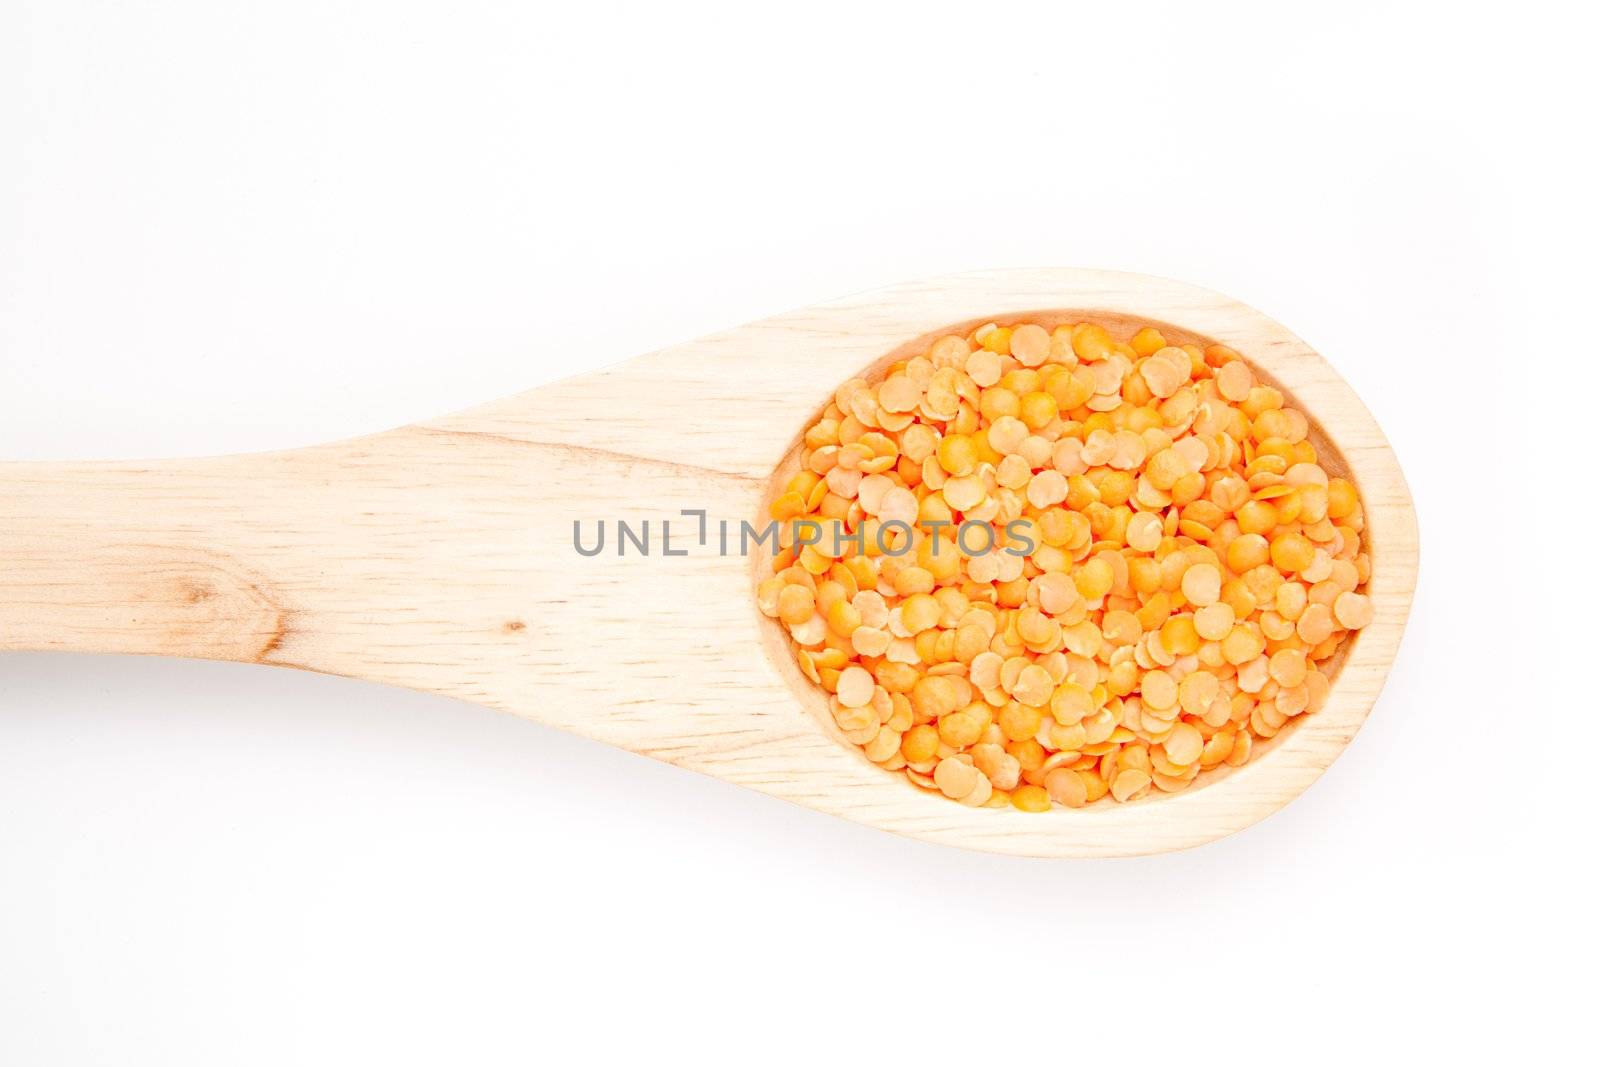 Wooden spoon with lentils by Wavebreakmedia